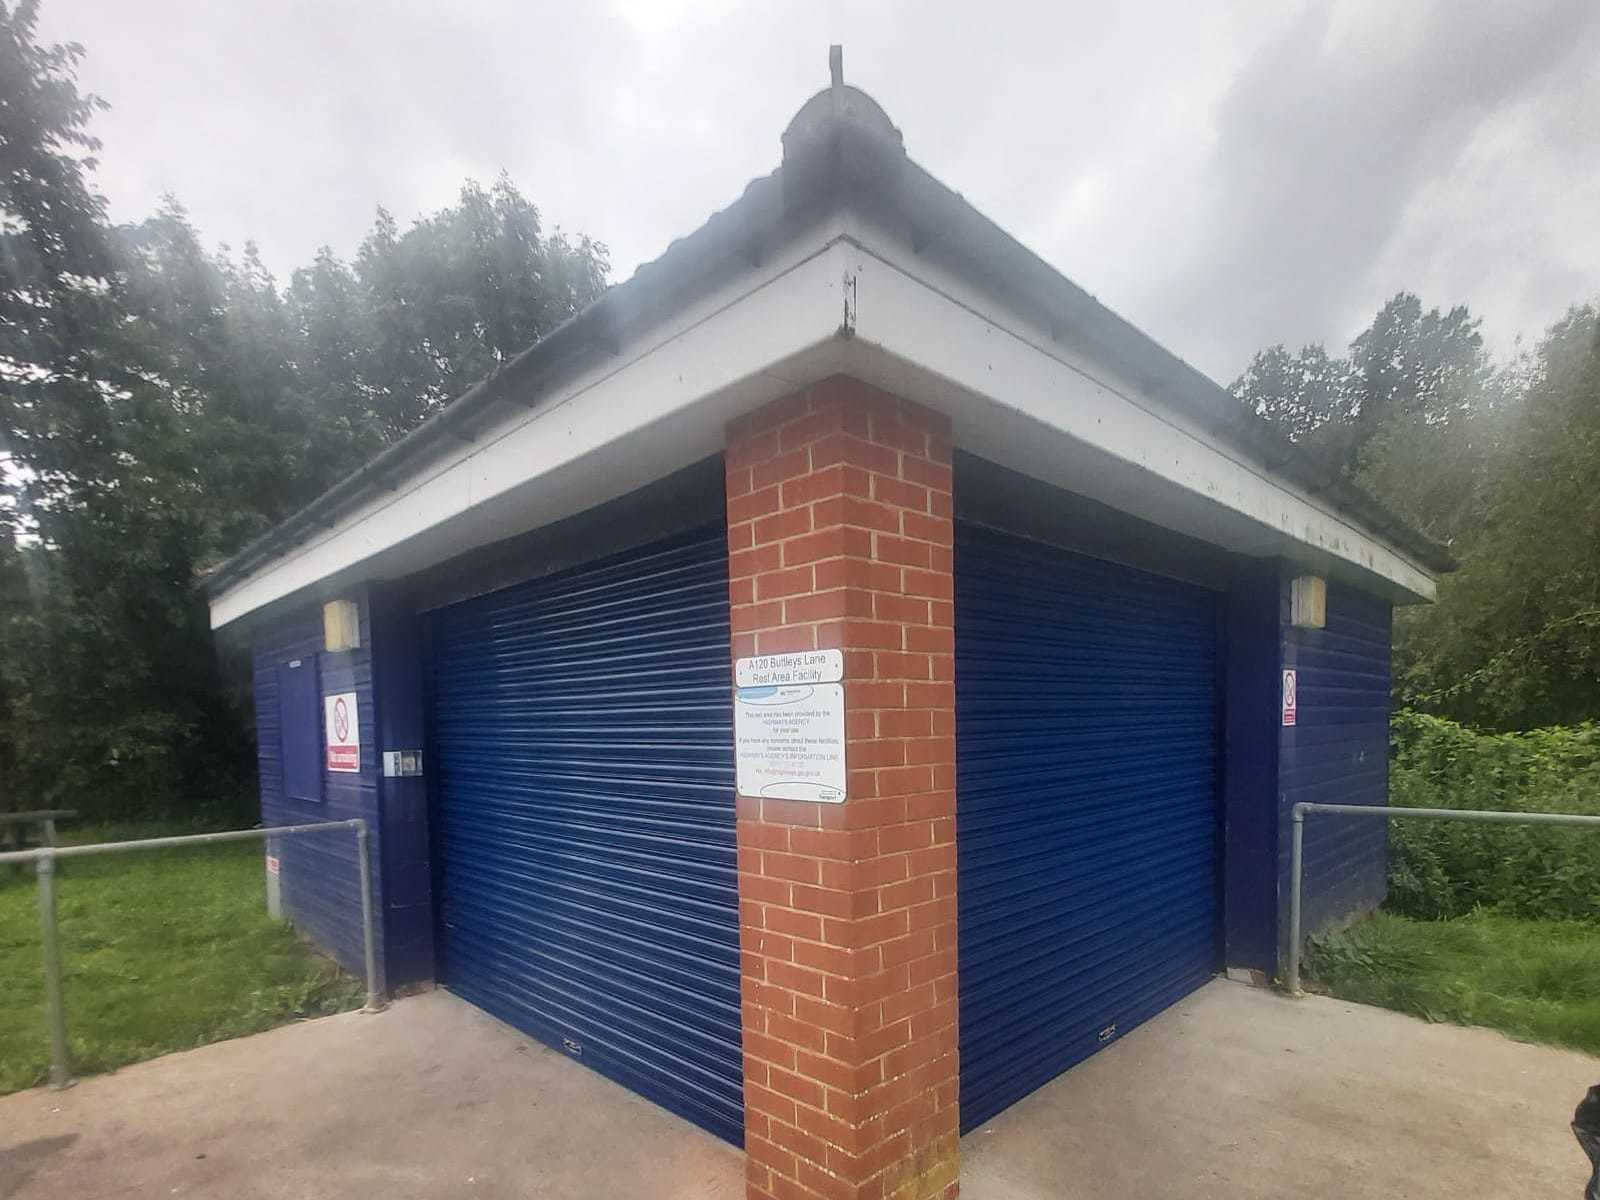 Roller shutters protecting an airport's car park toilet facilities